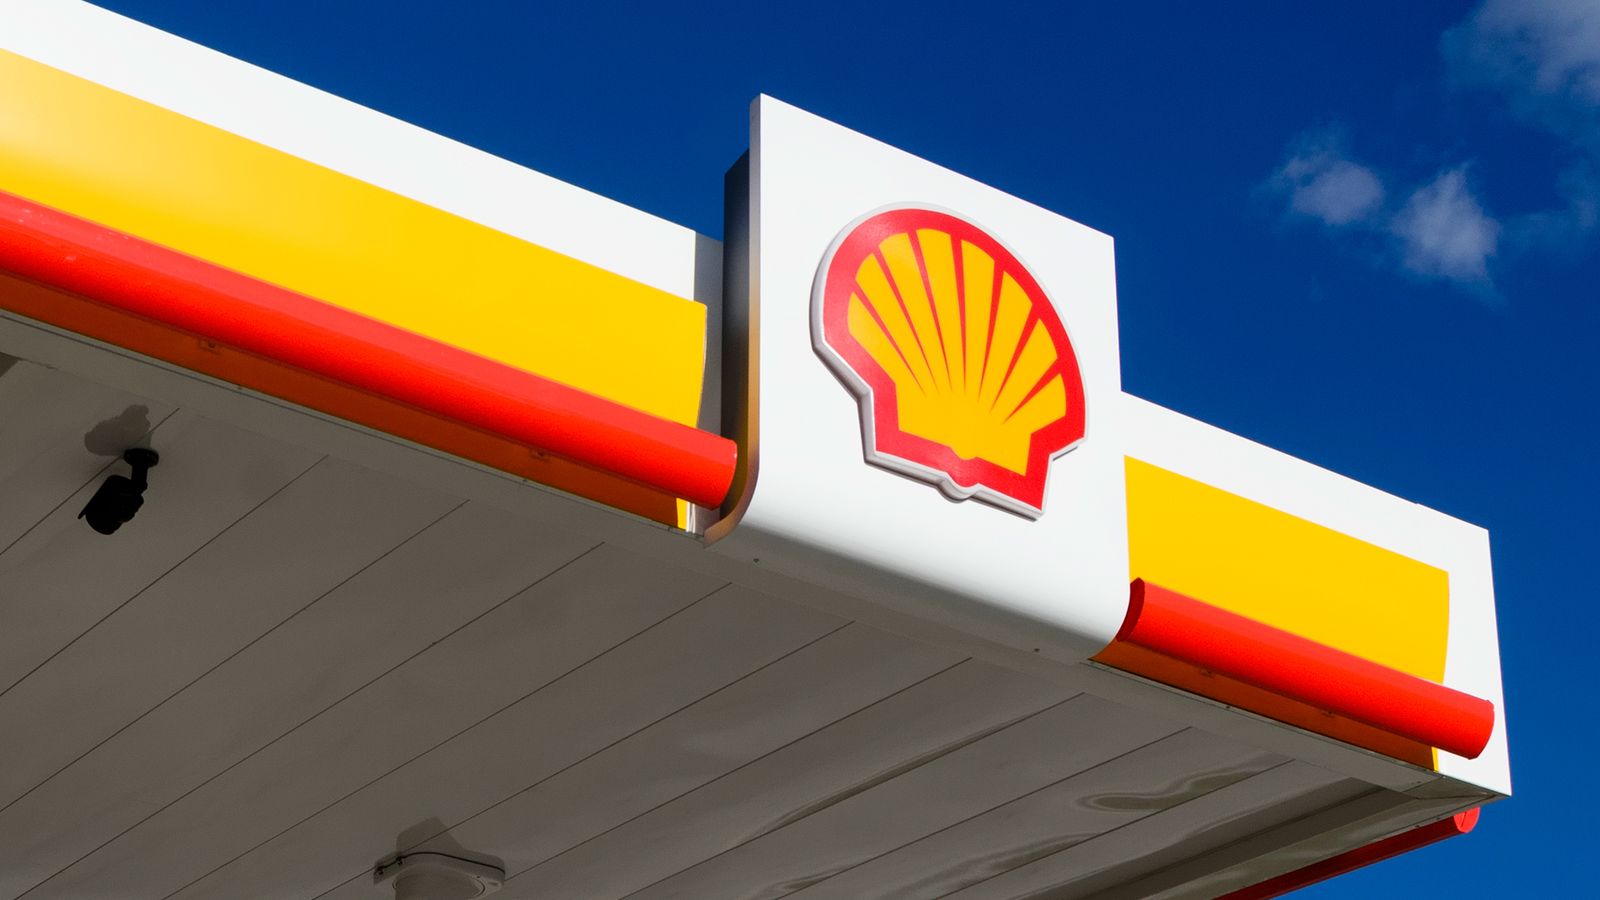 Shell to pay £1.7bn in UK and EU windfall taxes